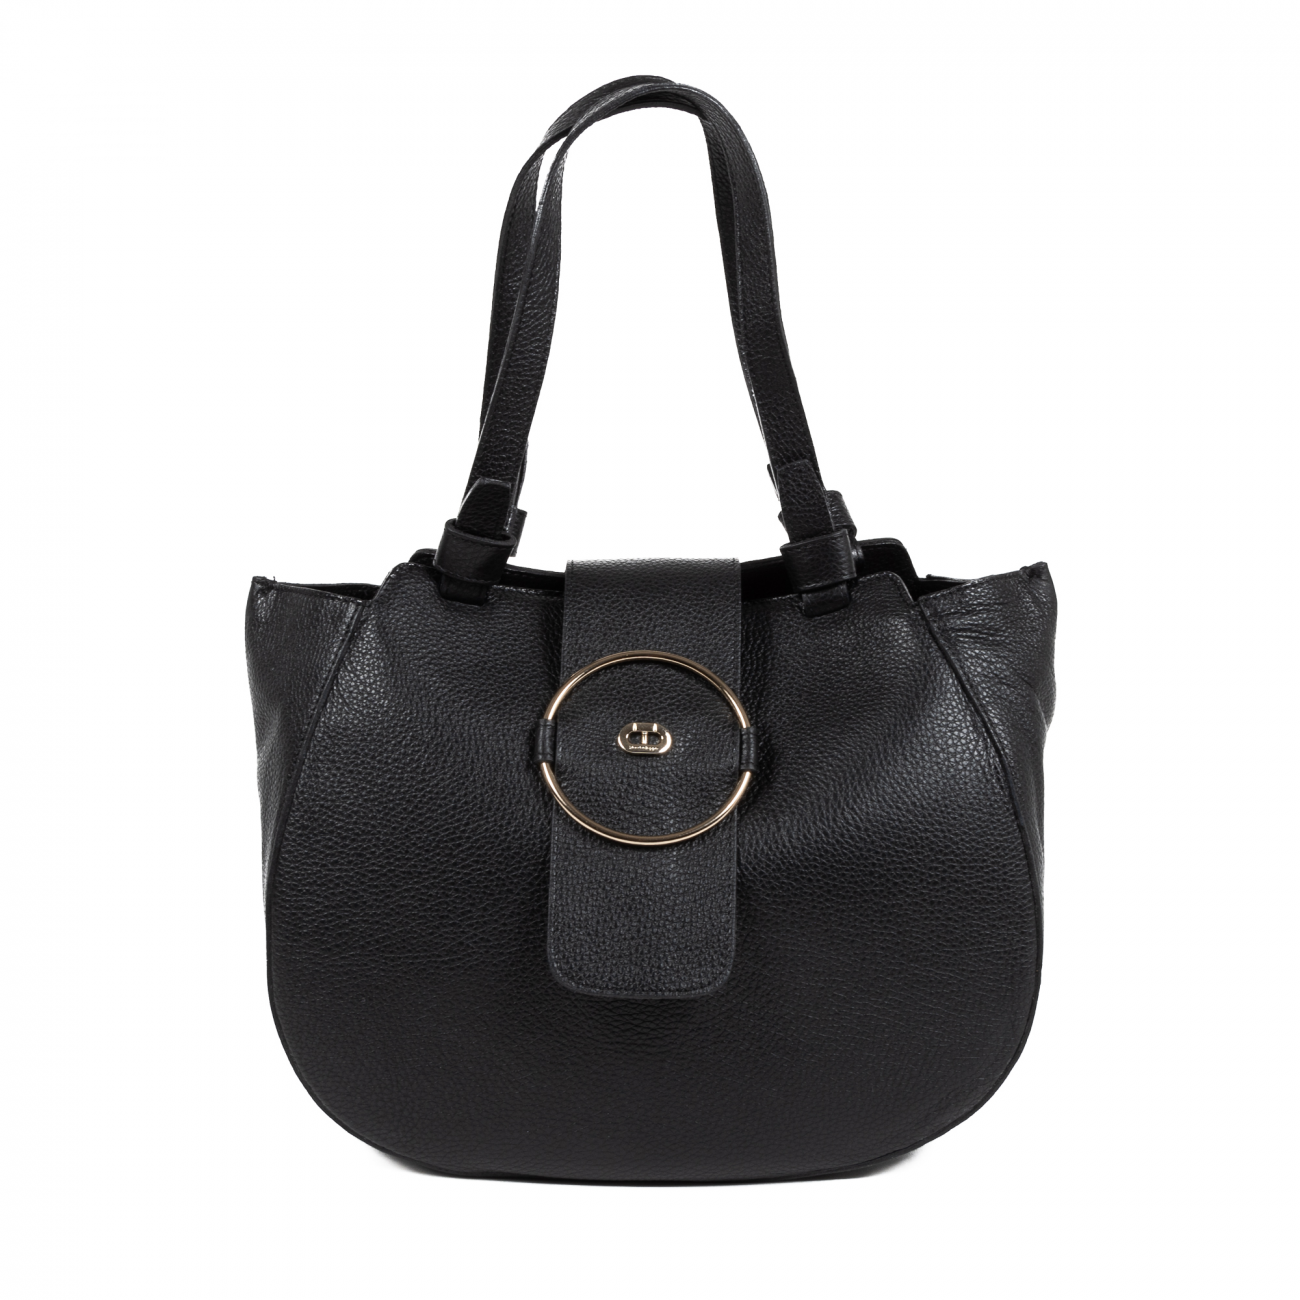 By: Dee Ocleppo- Details: Q250 CERVO NERO- Color: Black - Composition: 100% LEATHER - Measures: 31x25x13 cm - Made: ITALY - Season: SS